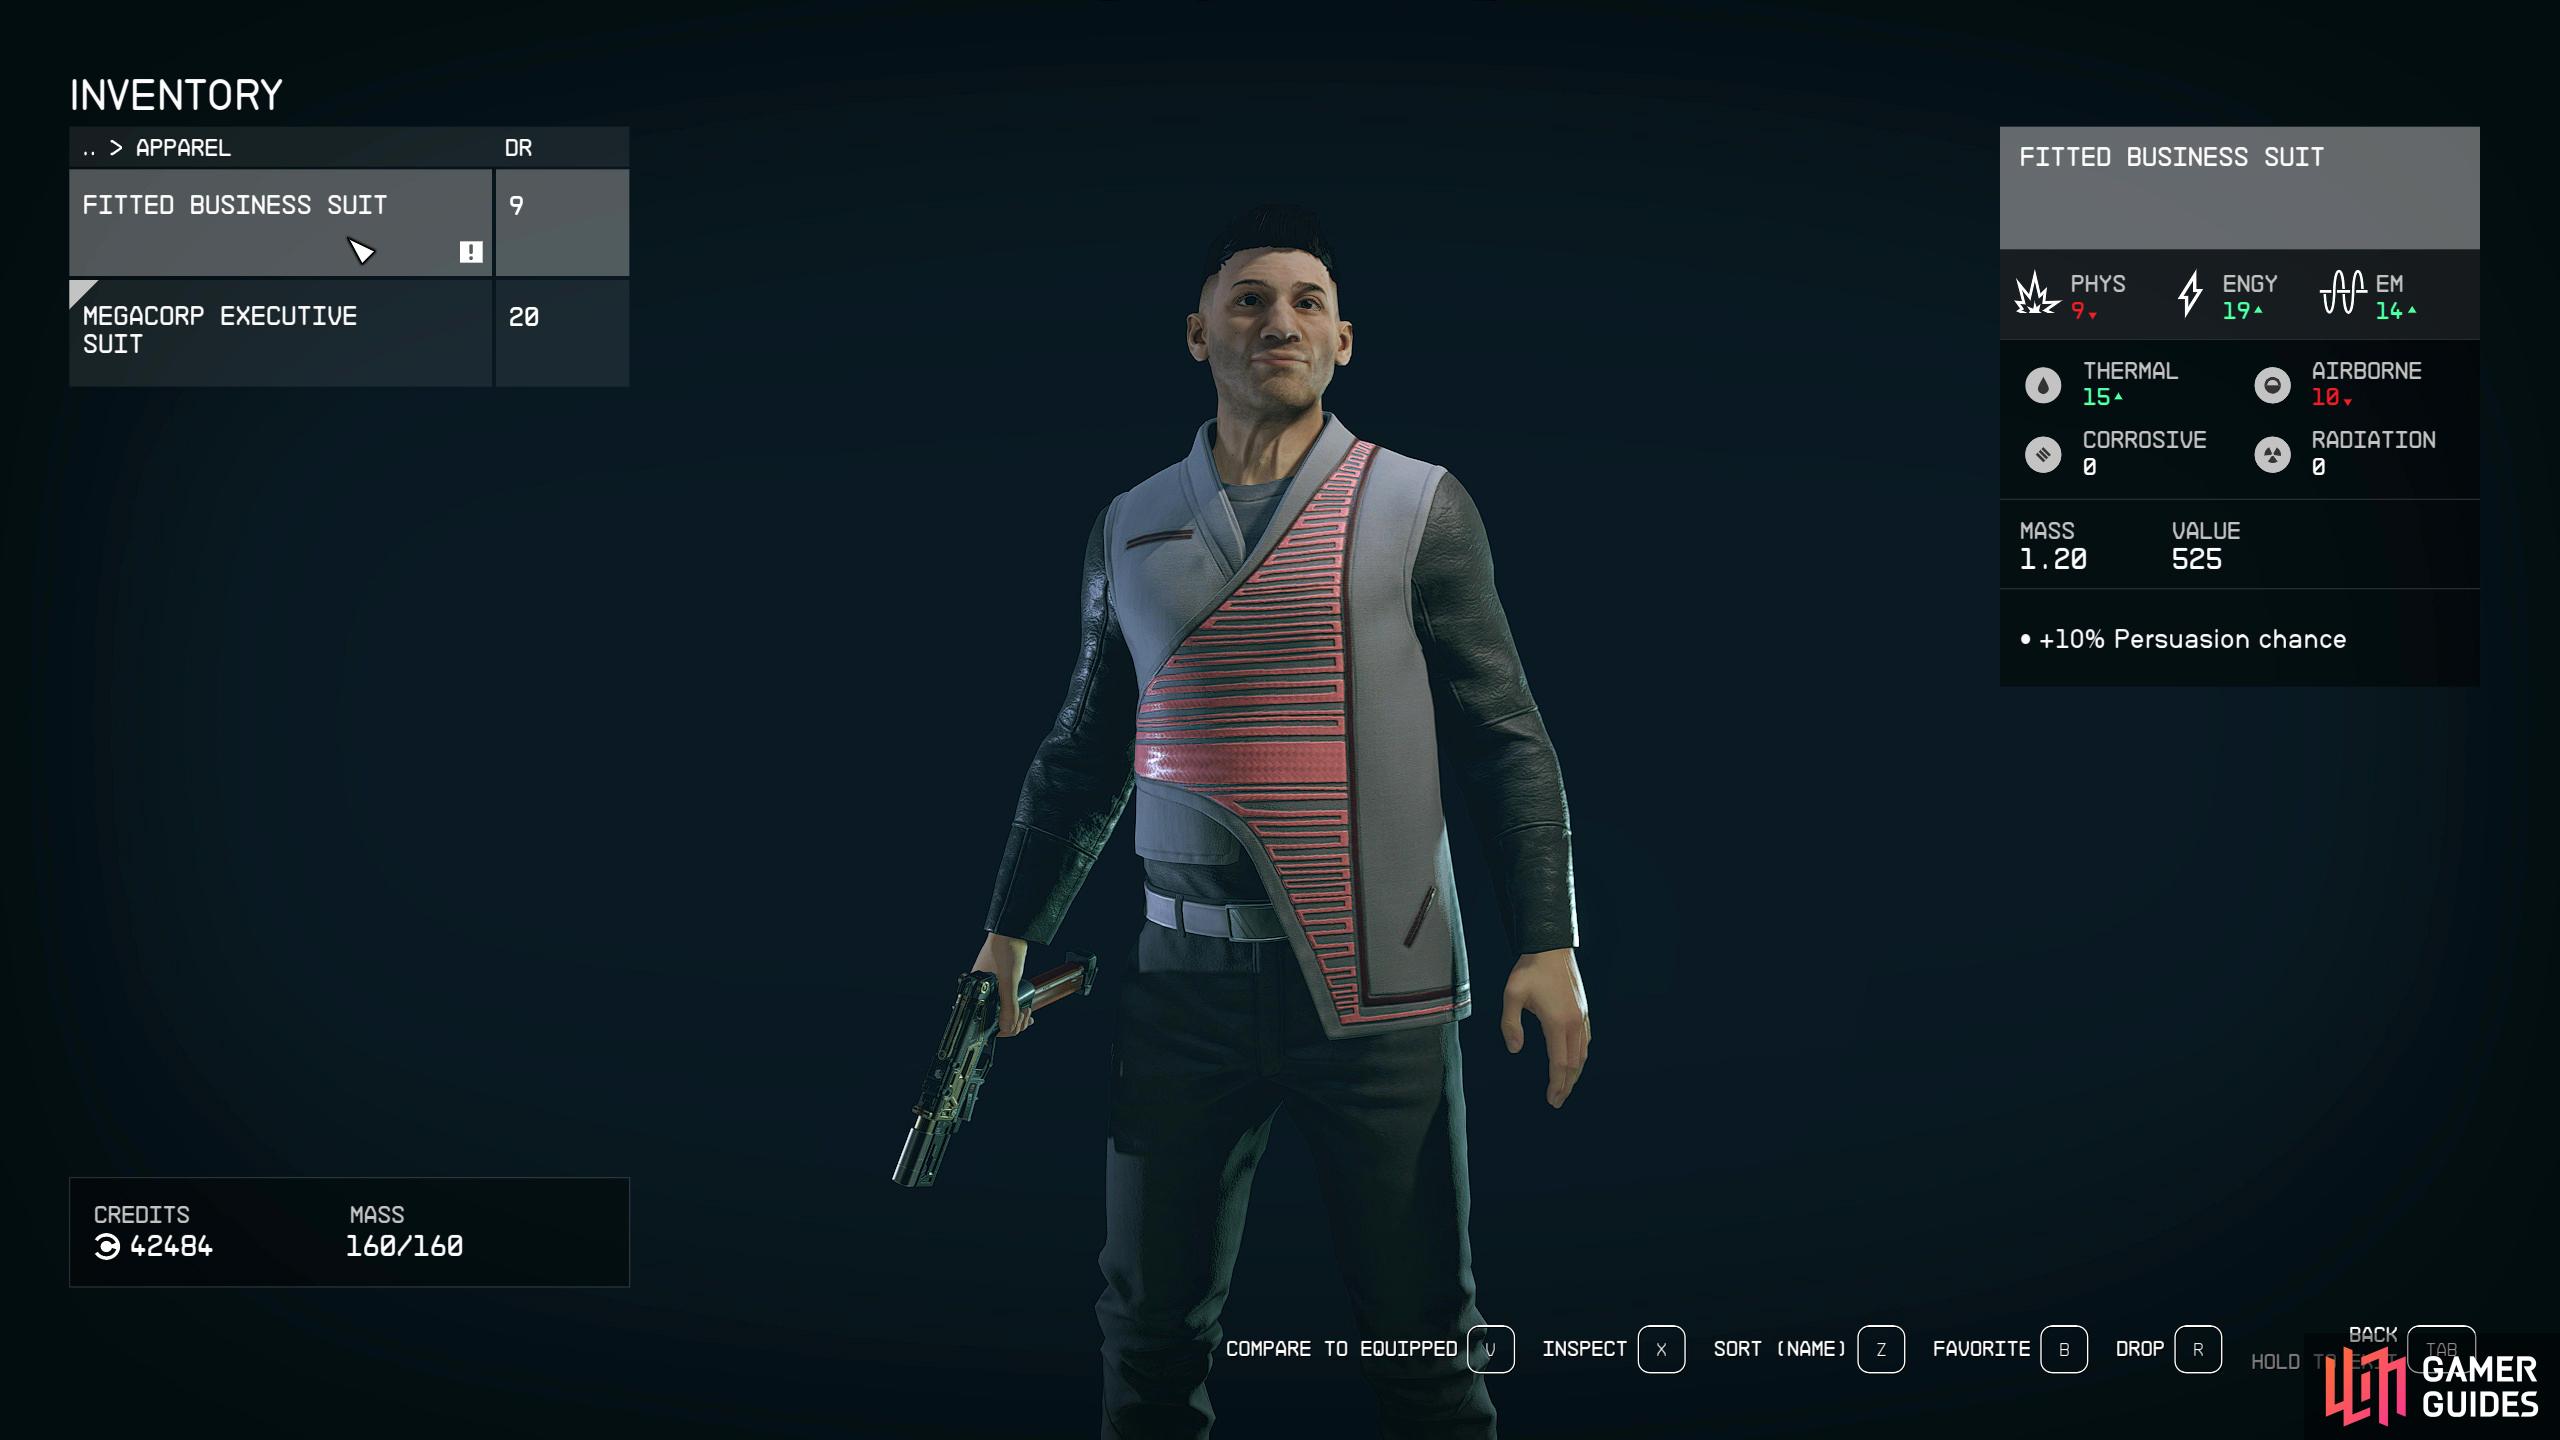 Also, make sure you equip the Fitted Business Suit. Not only does it increase your persuasion chance, but Zola will also acknowledge it later.